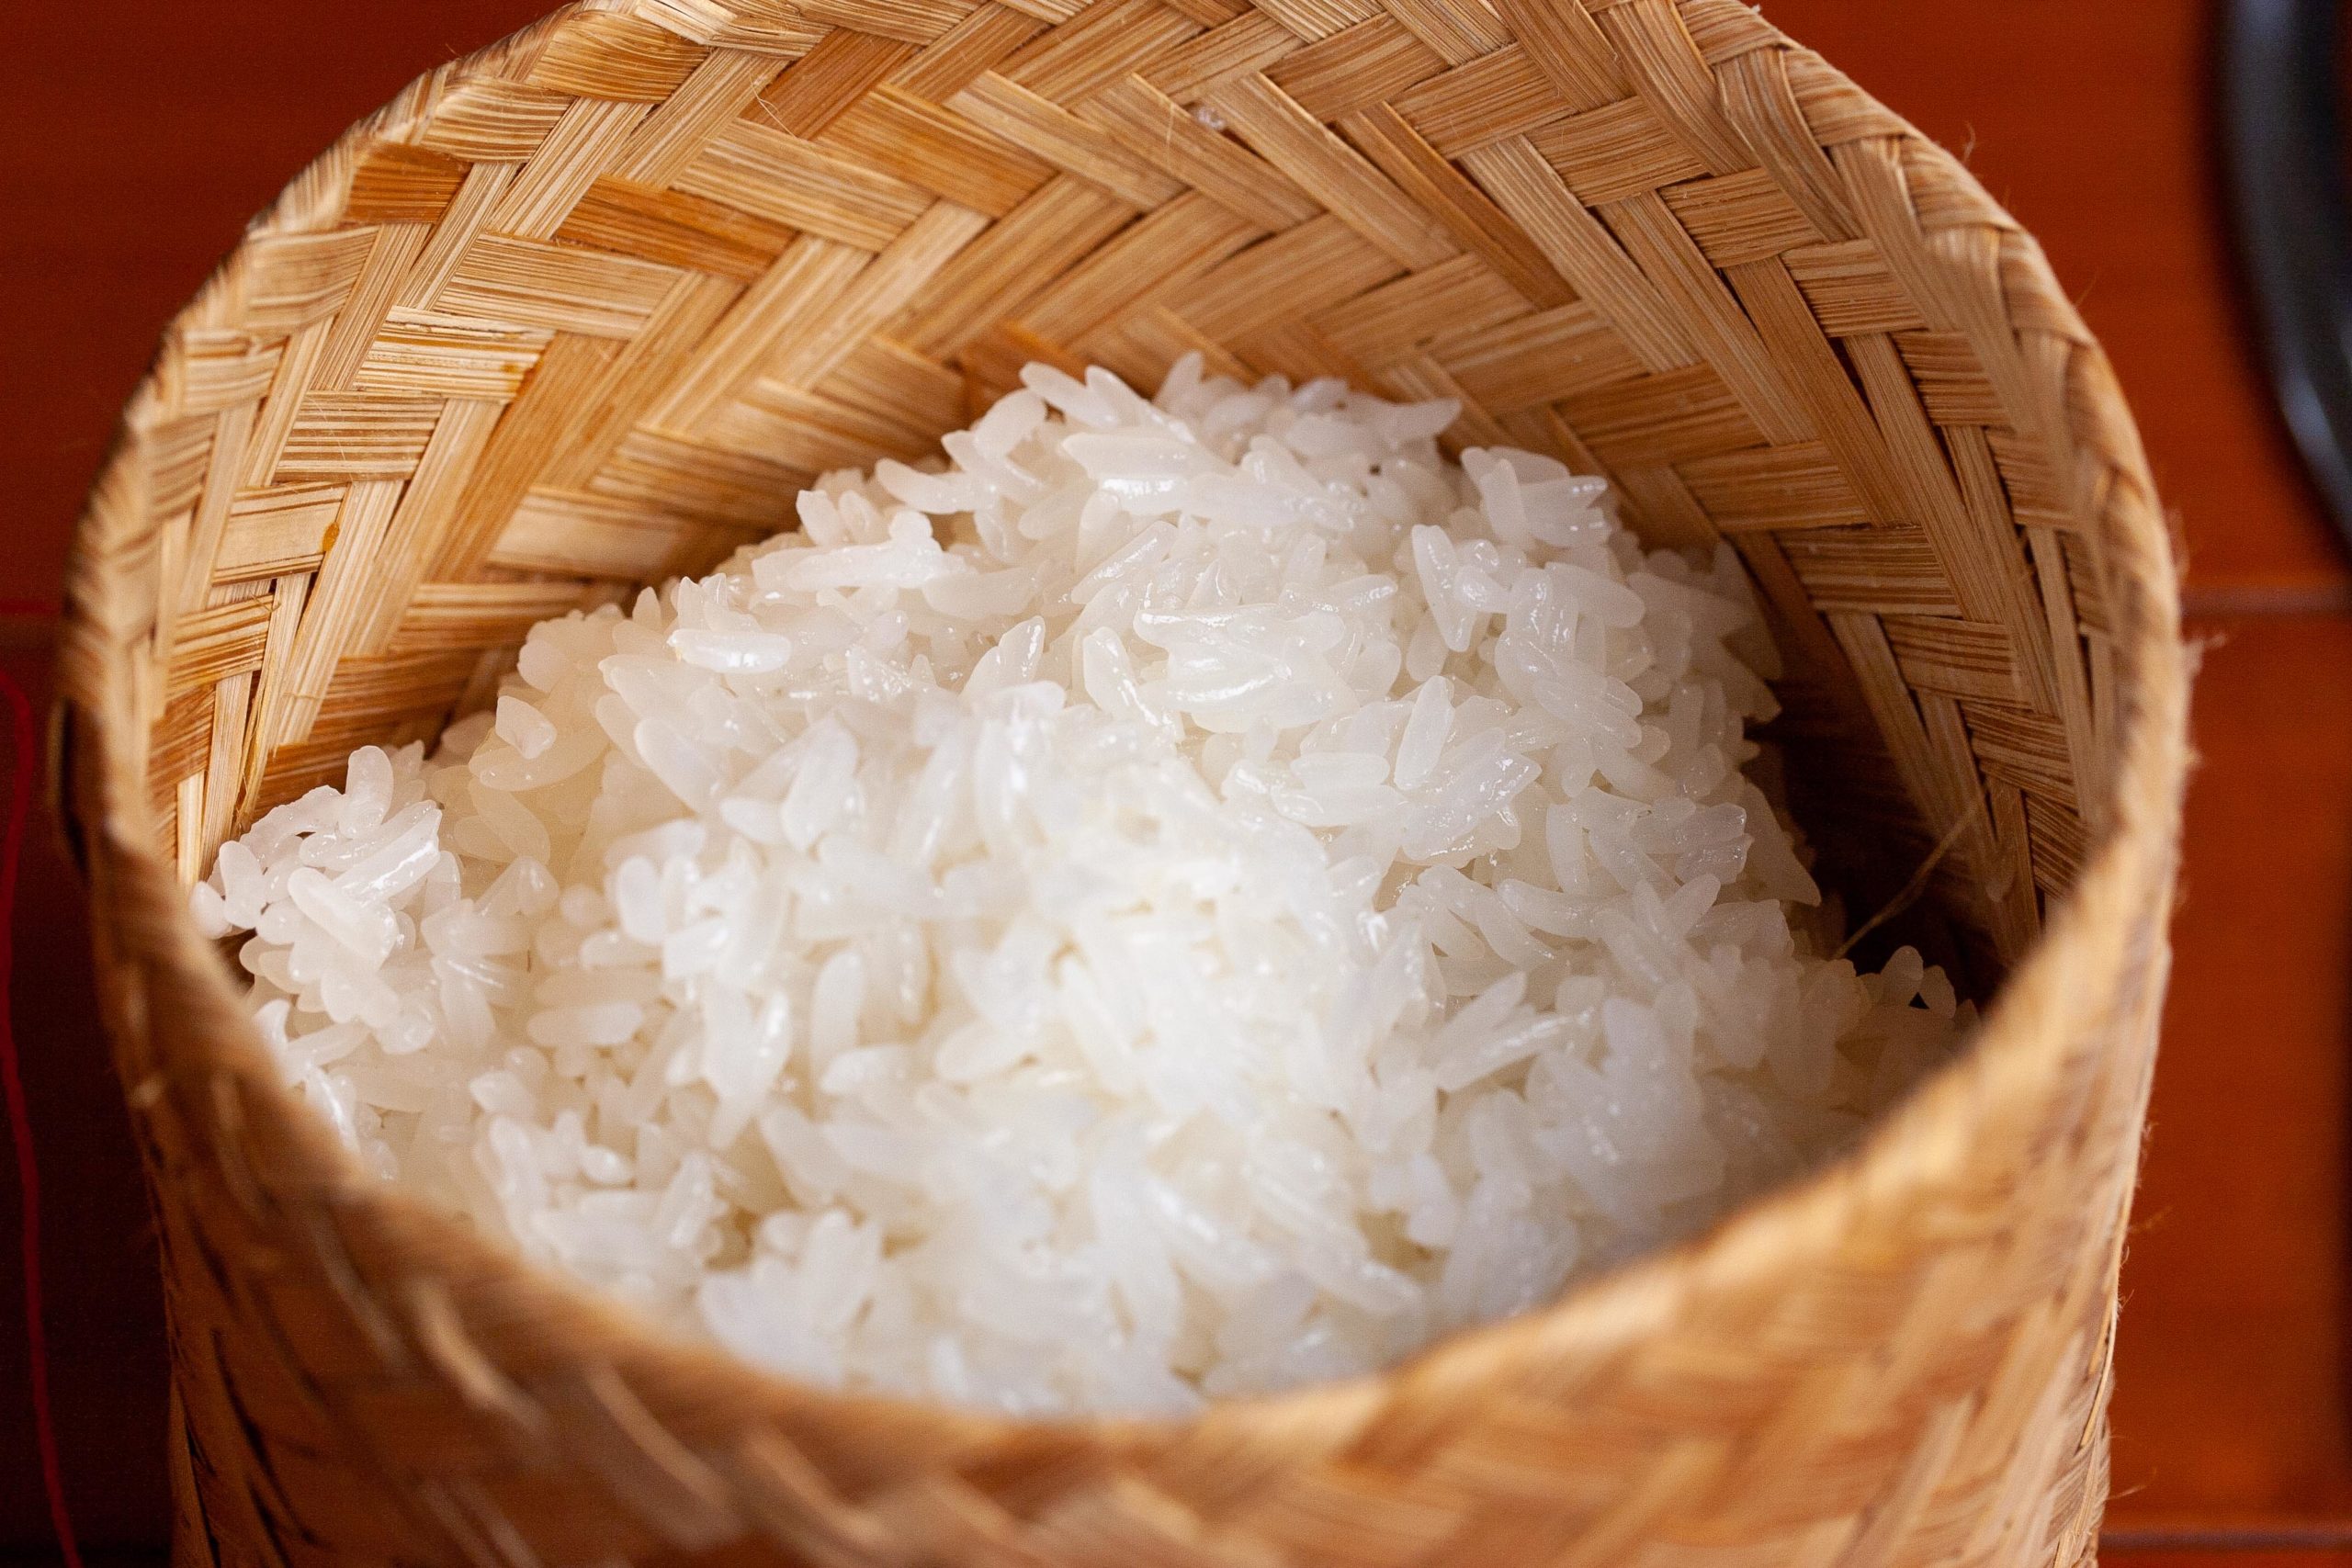 https://www.tastythais.com/wp-content/uploads/2020/03/Sticky-Rice-Individual-Serving-Container-1-scaled.jpg